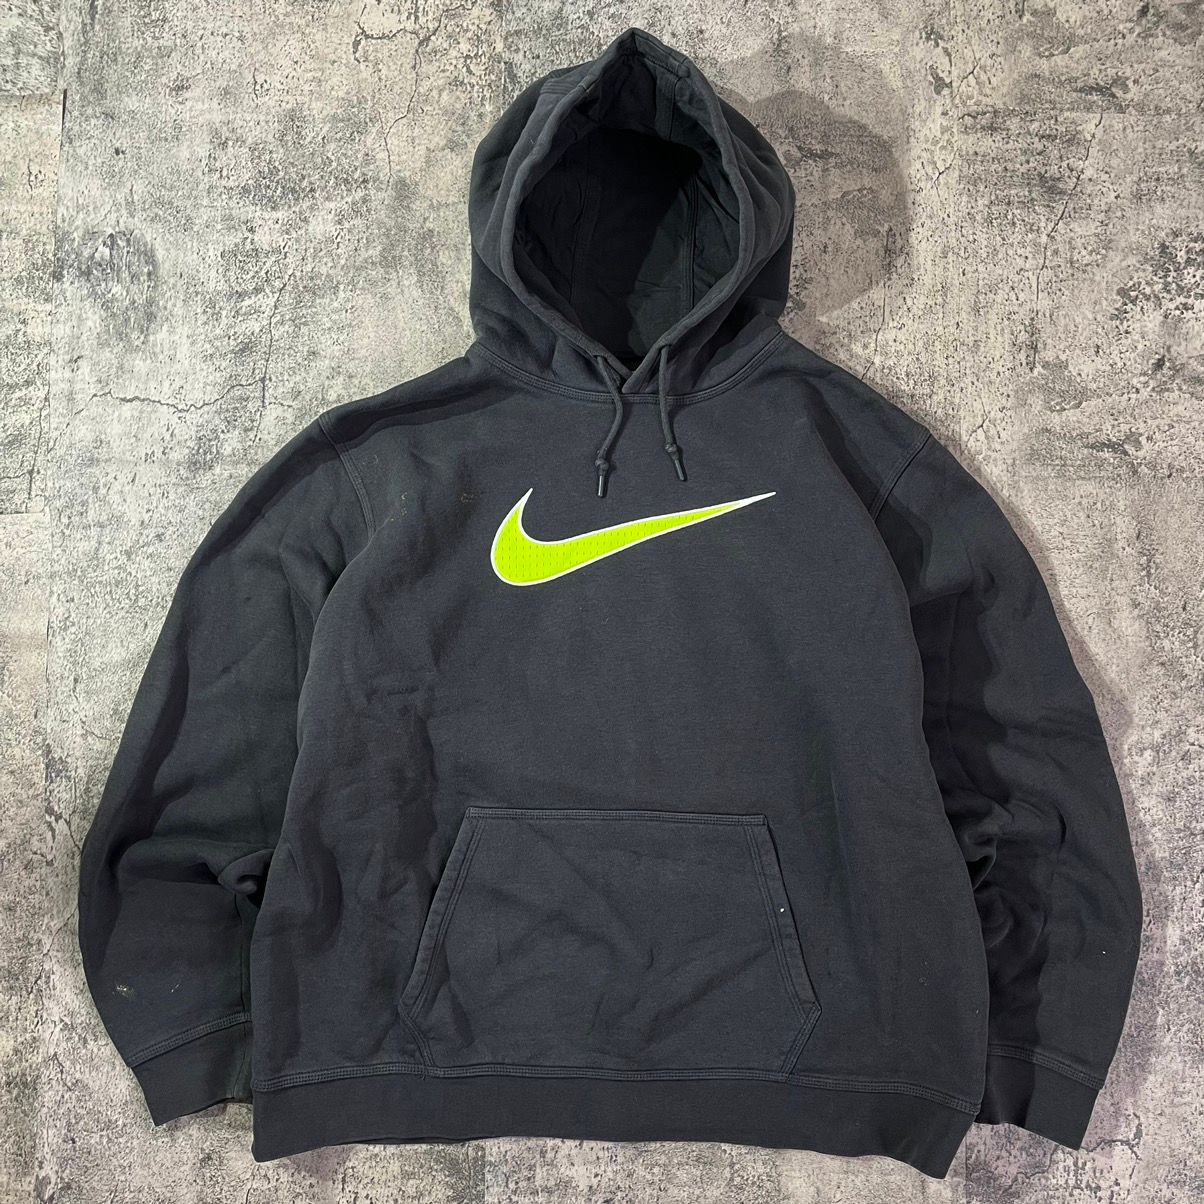 Nike Crazy Vintage Black Faded Nike Hoodie Oversized Boxy Size US XL / EU 56 / 4 - 1 Preview